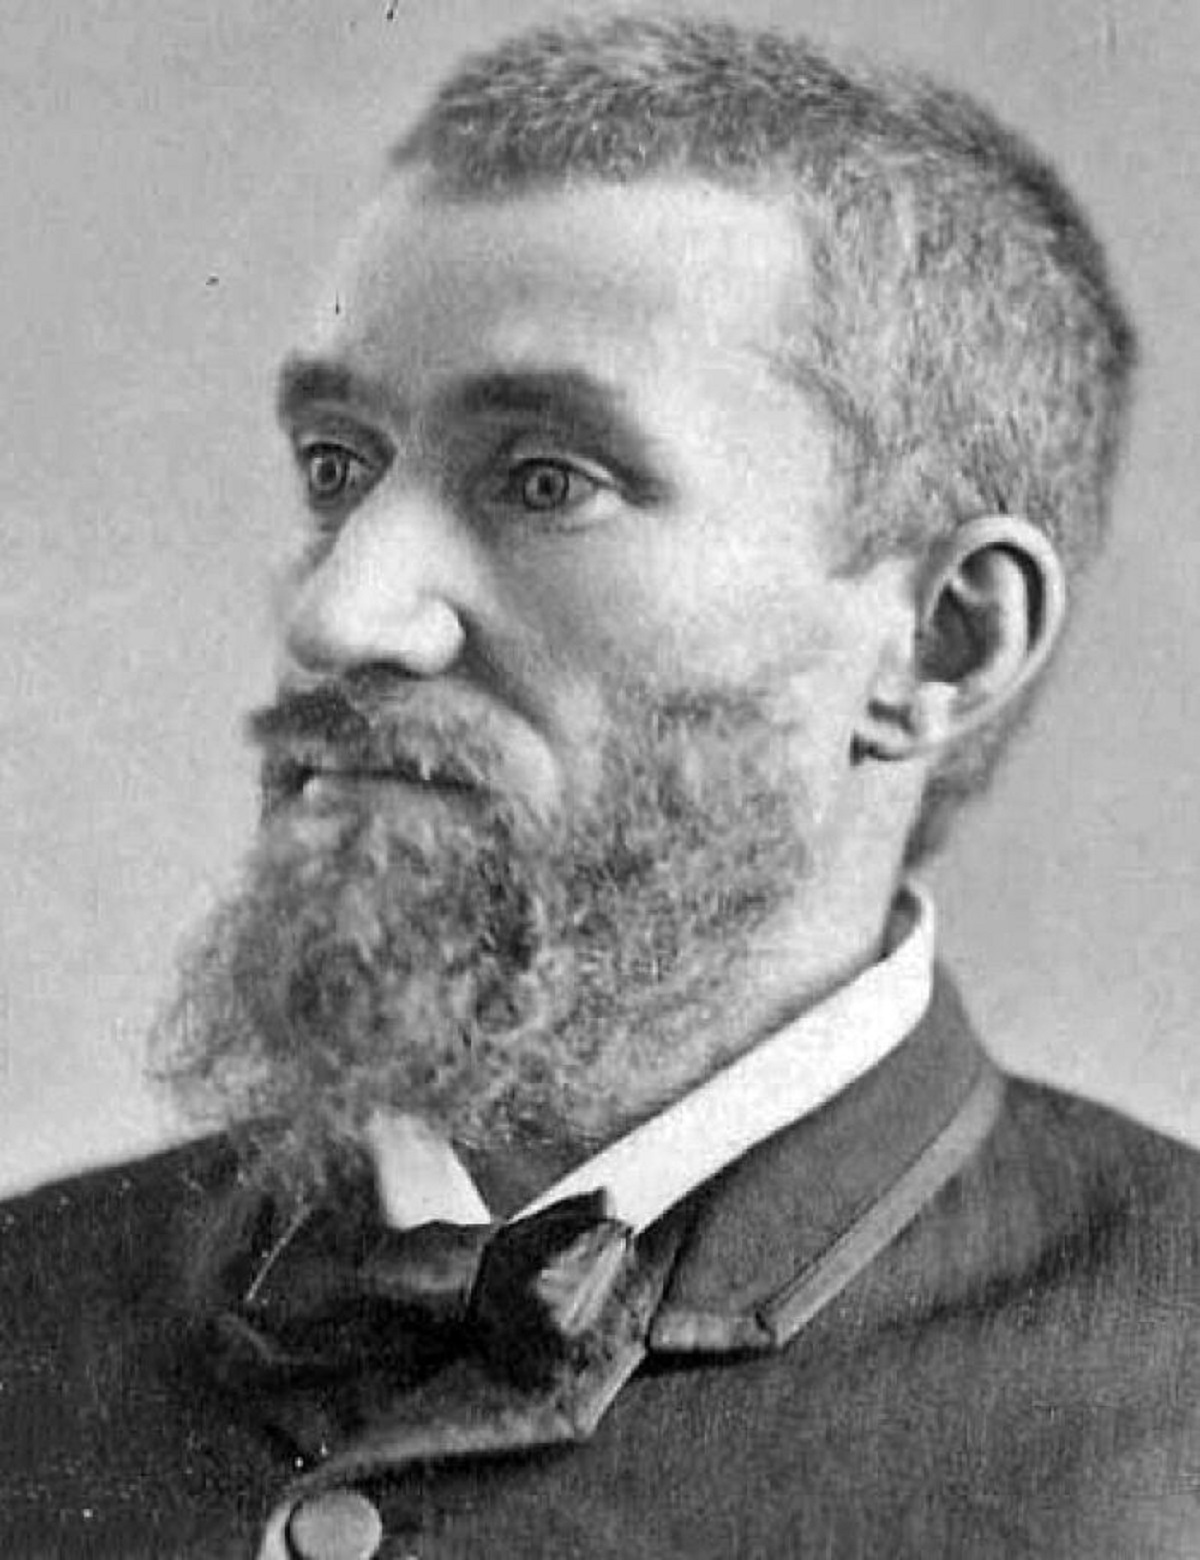 That when Charles Guiteau bought the gun he would use to assassinate President Garfield, he chose one with a more expensive ivory handle, thinking it would look better in a museum. Though the gun was given to the Smithsonian, it has since been lost.